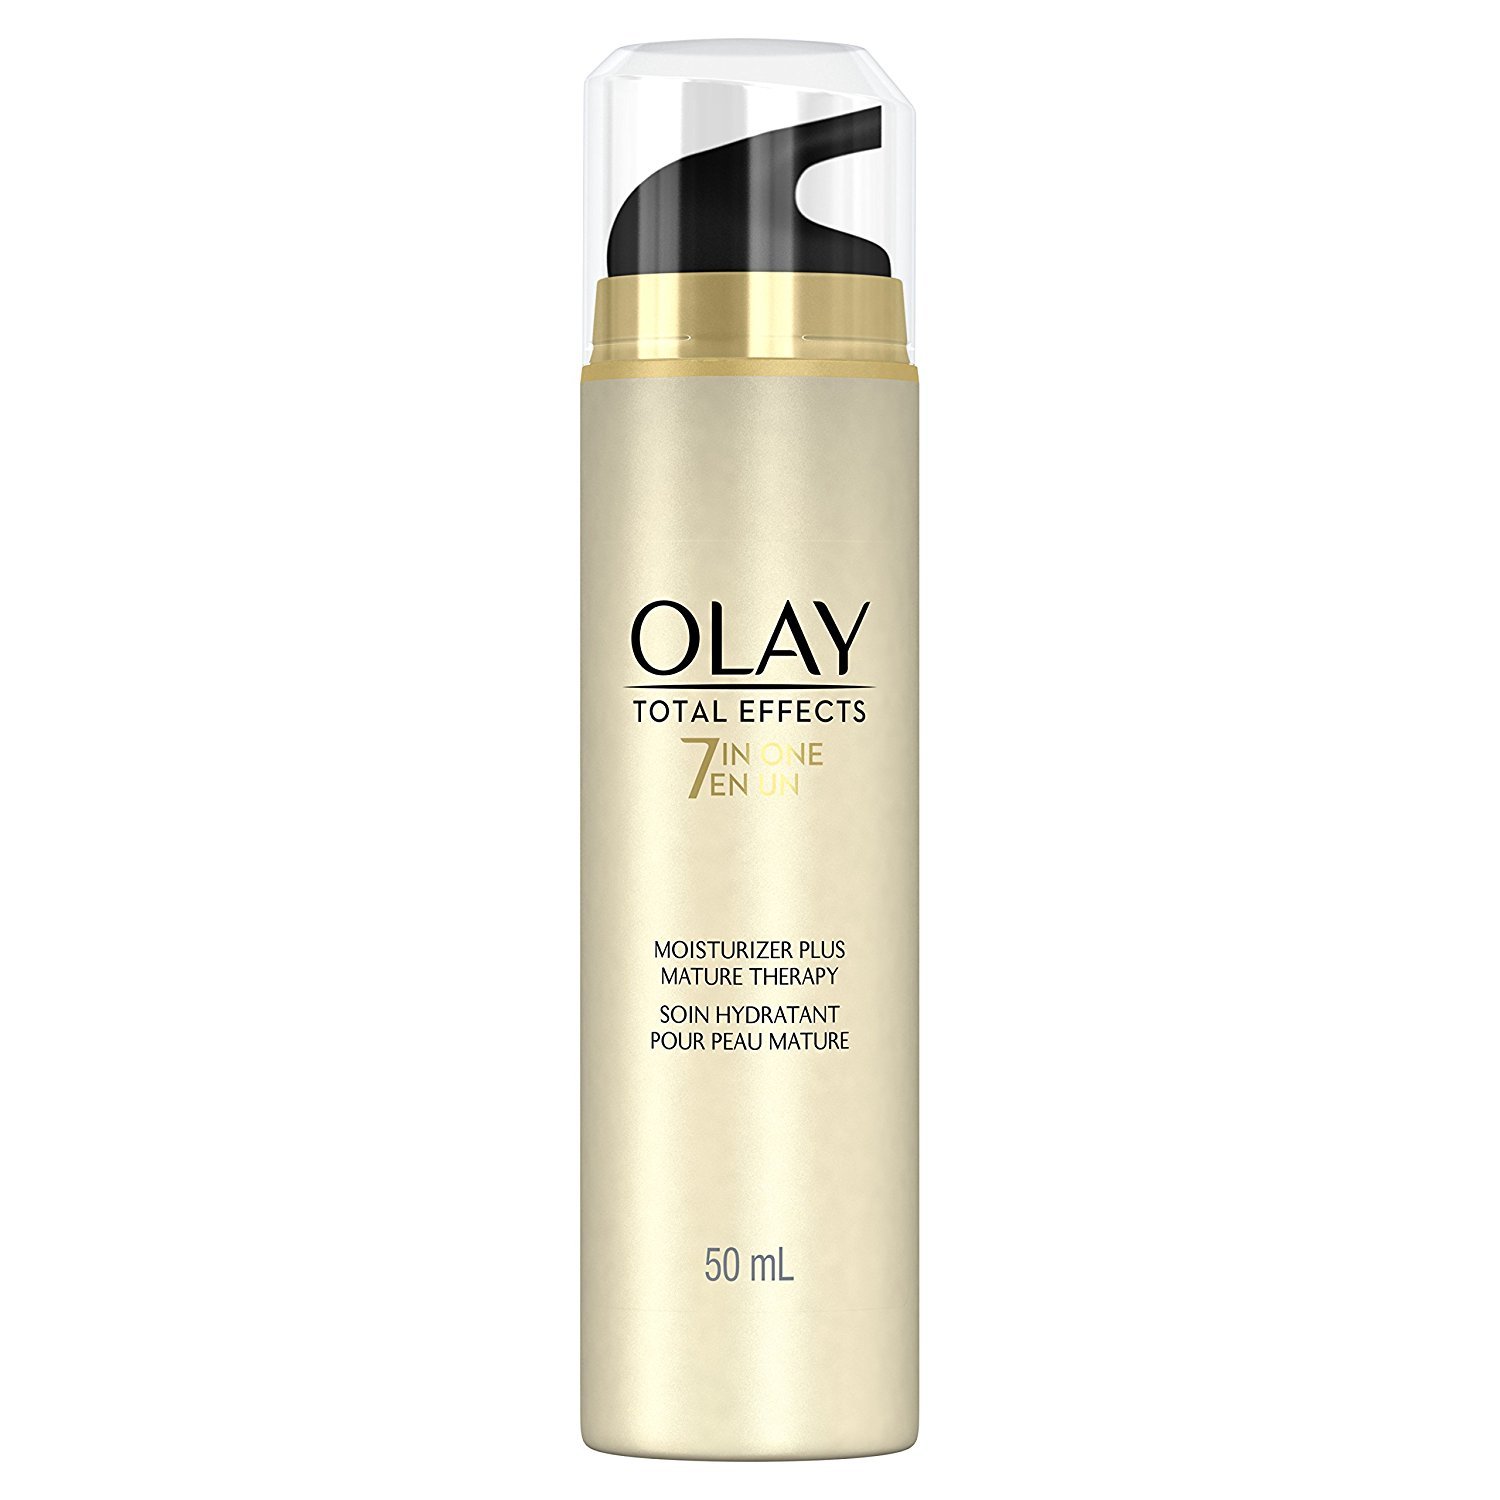 Olay Total Effects 7-In-1 Moisturizer Plus, Mature Therapy, 1.70 Fl. Oz. - image 1 of 7